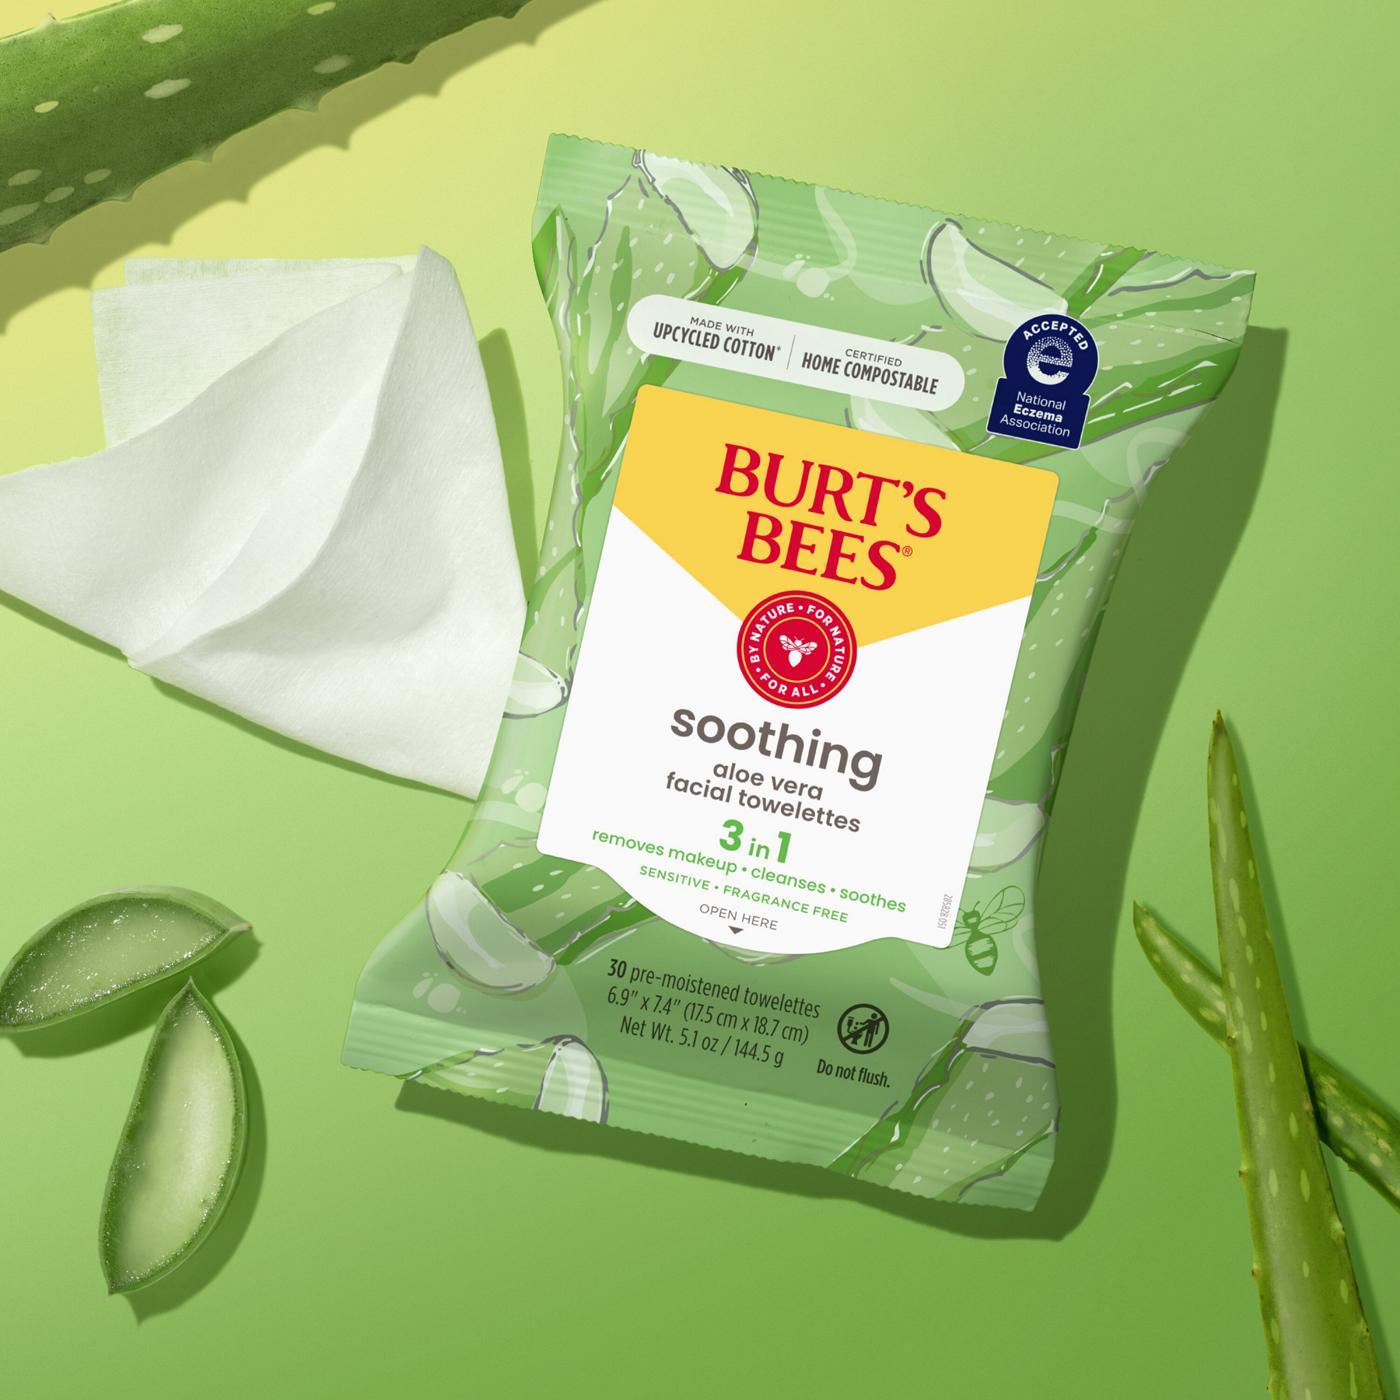 Burt's Bees Soothing Facial Towelettes - Aloe Vera; image 13 of 13